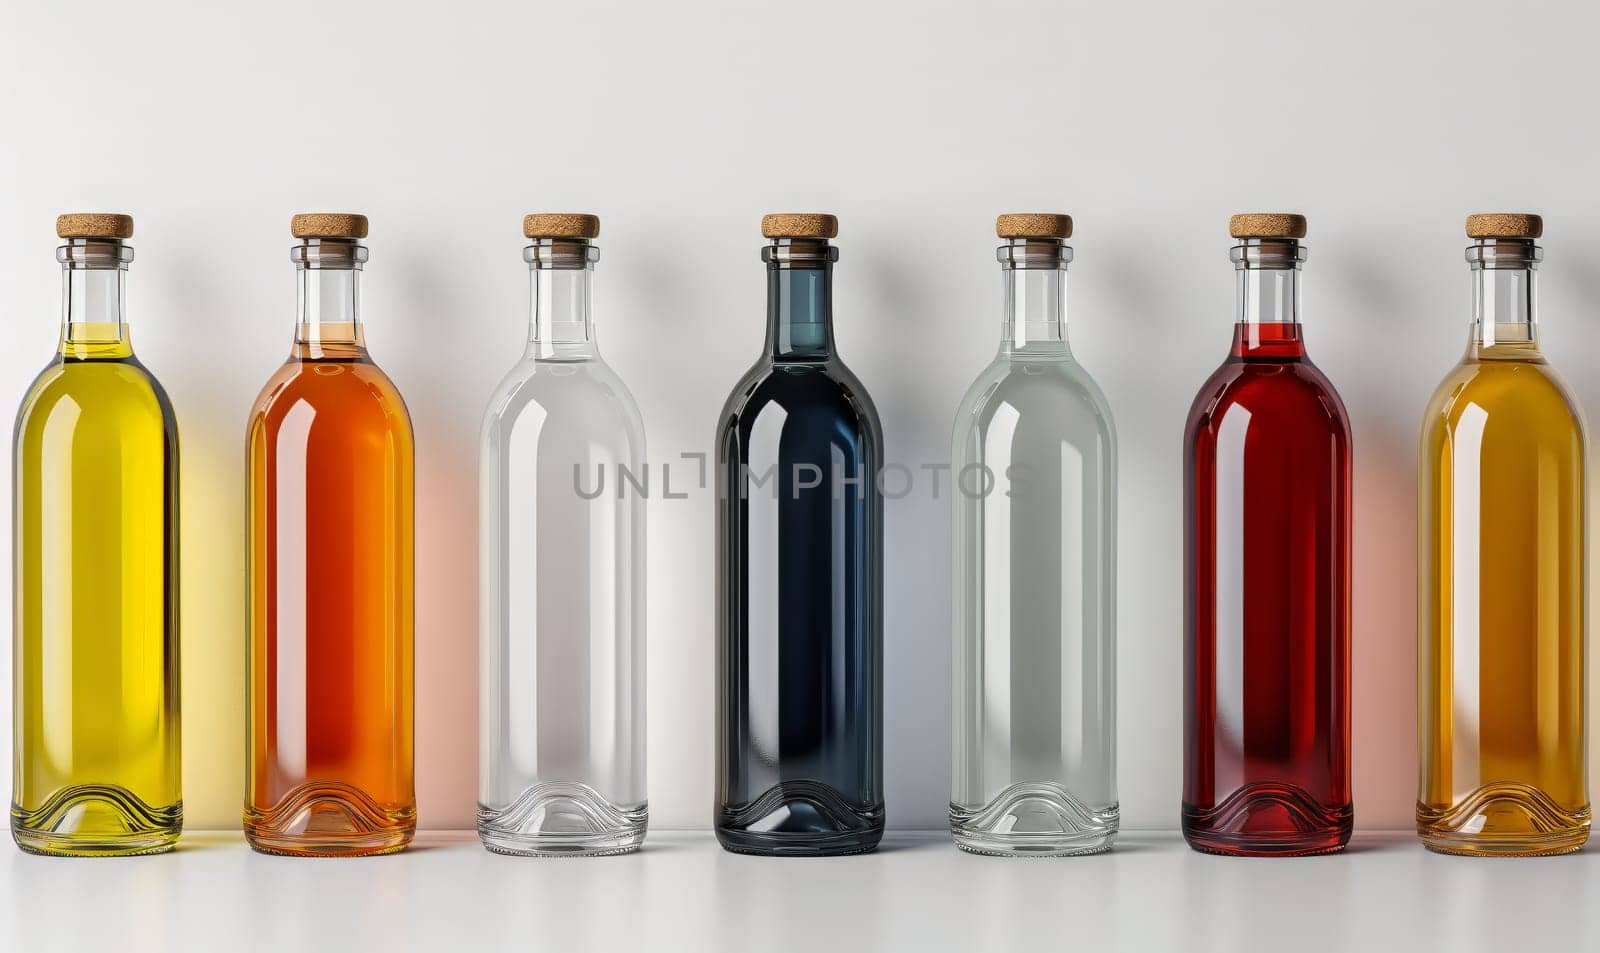 Empty transparent bottles with caps on a light background. by Fischeron